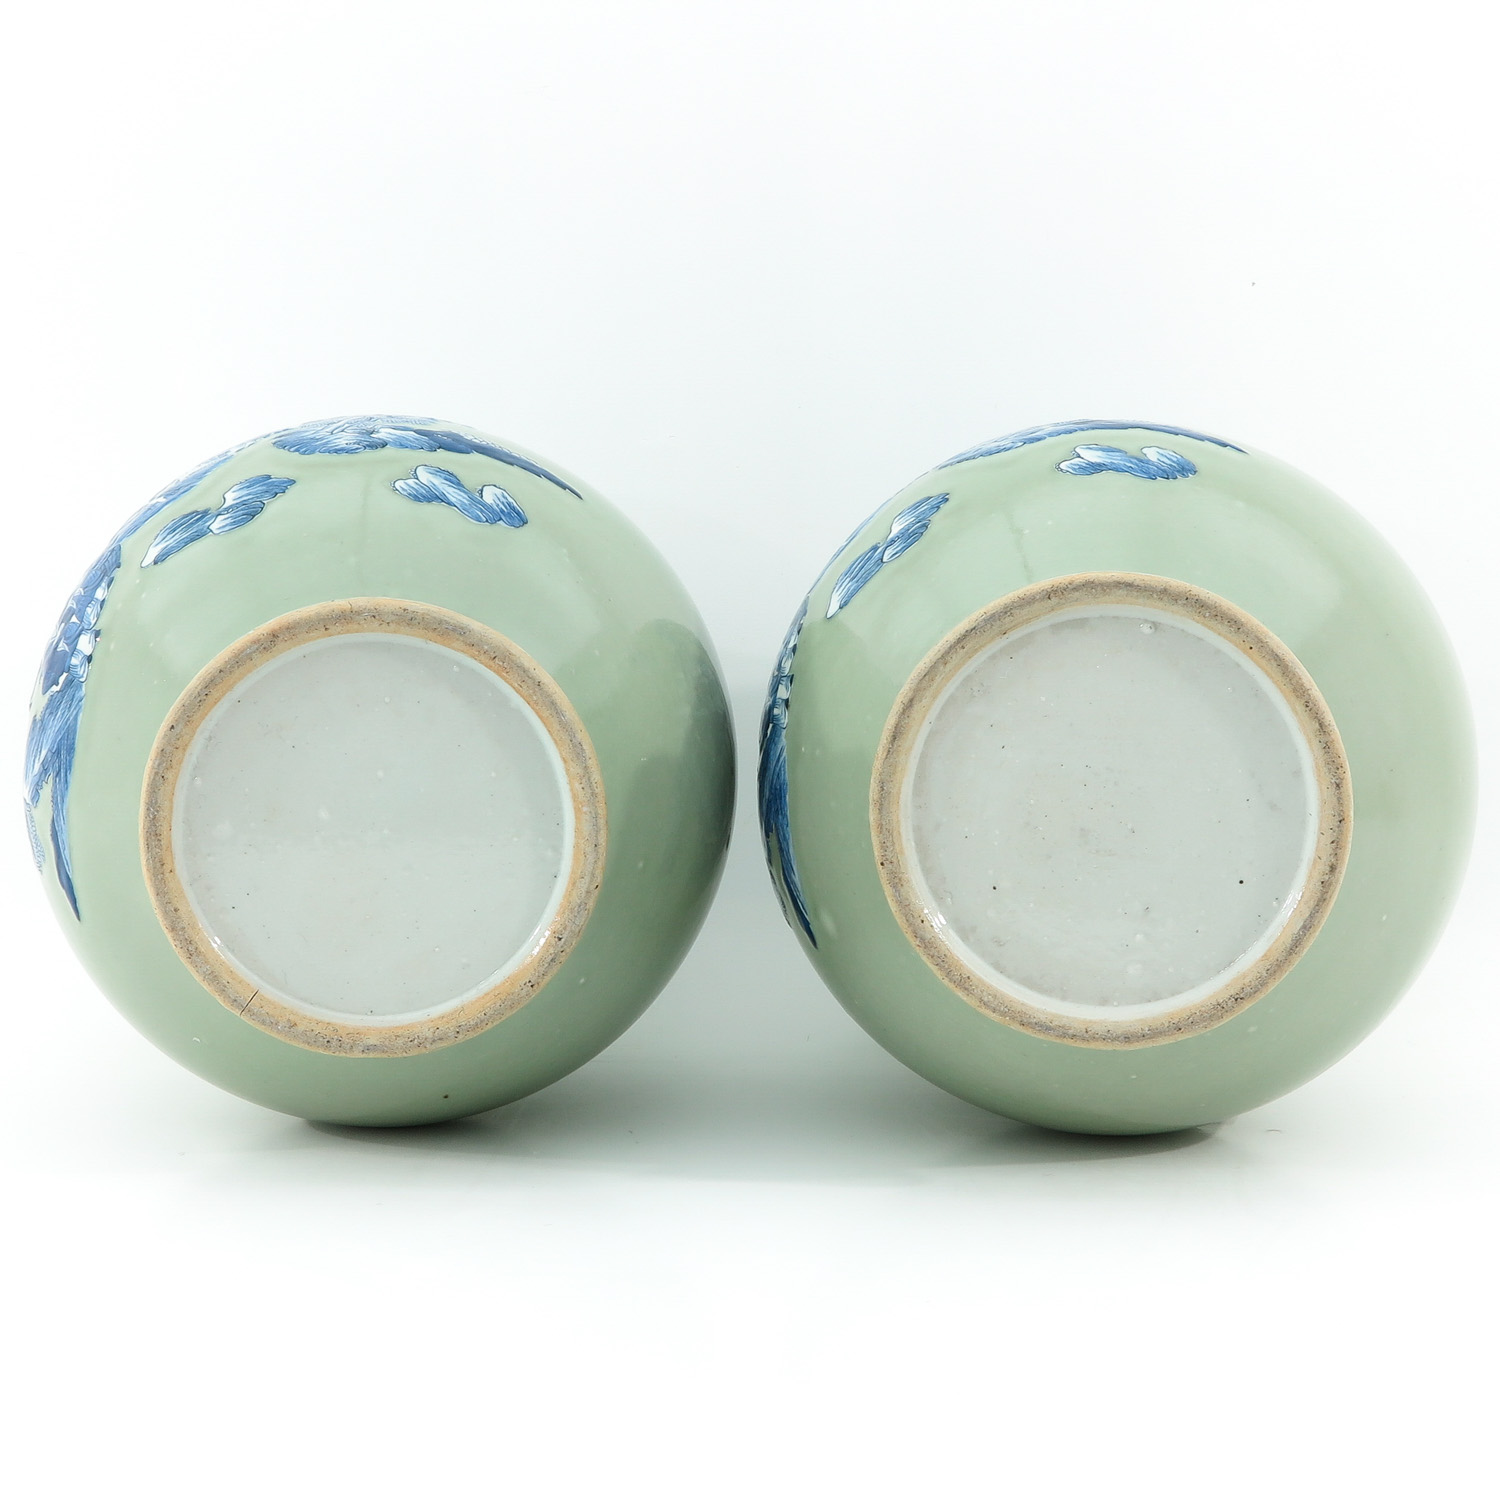 A Pair of Celadon and Blue Hu Vases - Image 6 of 10